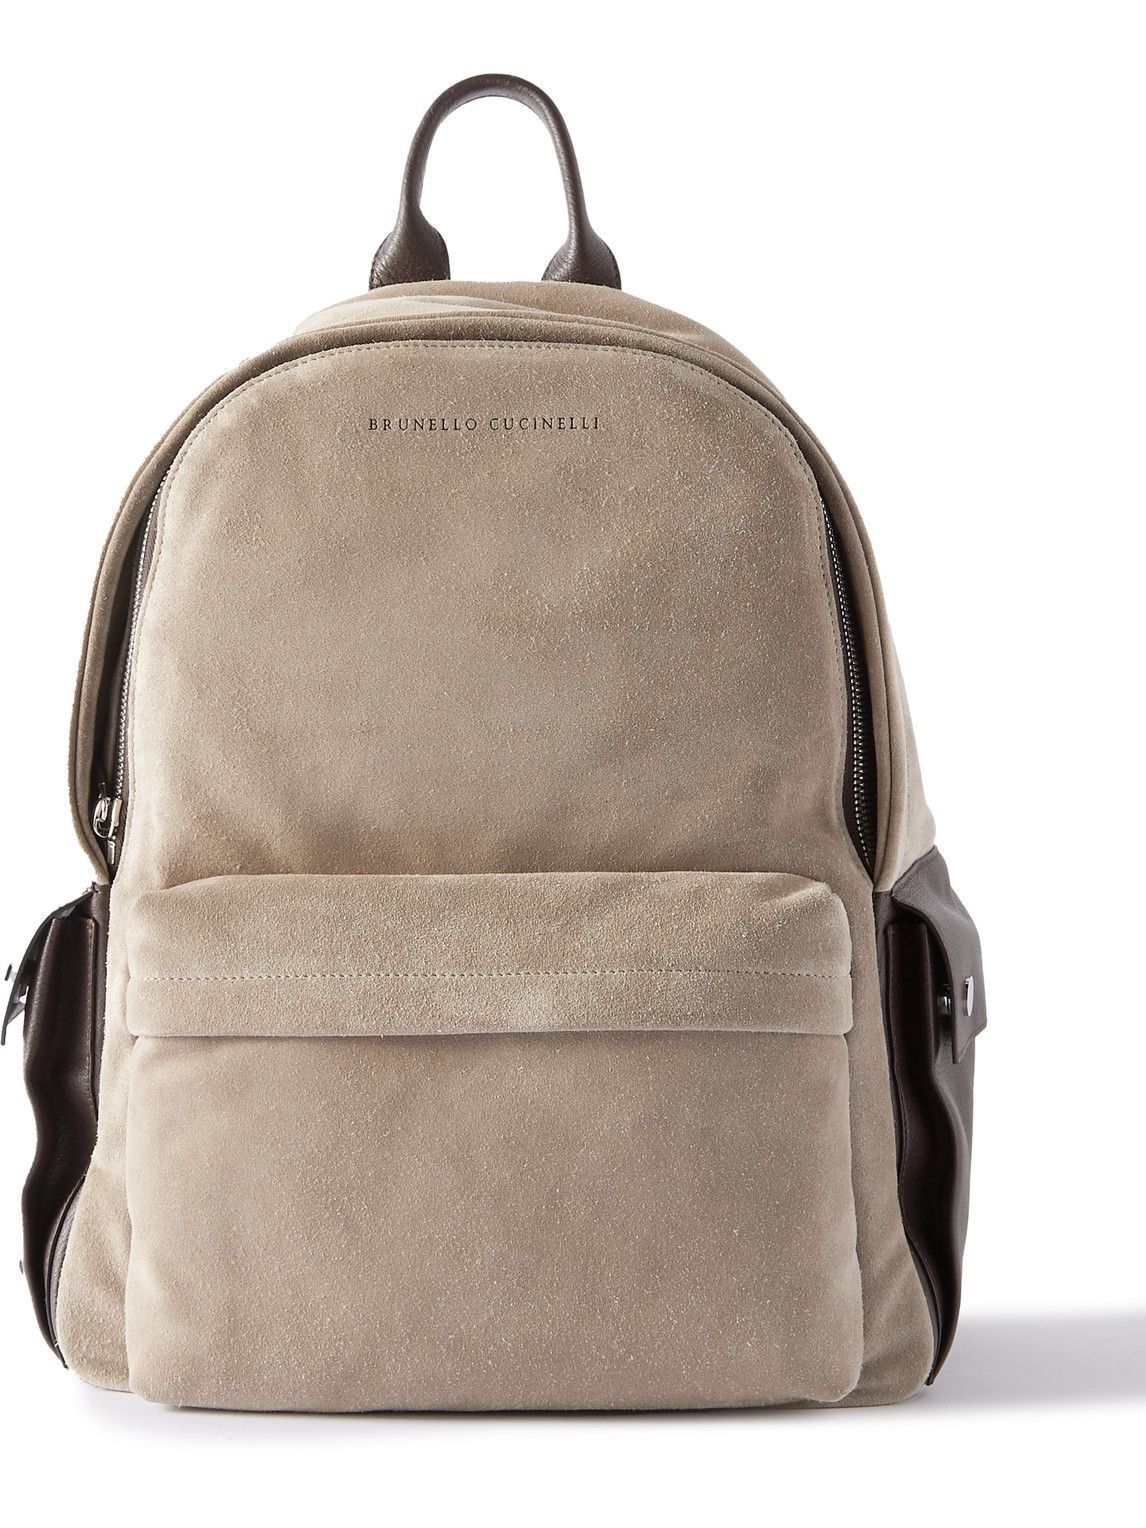 UO Indie Suede Backpack | Urban Outfitters Mexico - Clothing, Music, Home &  Accessories